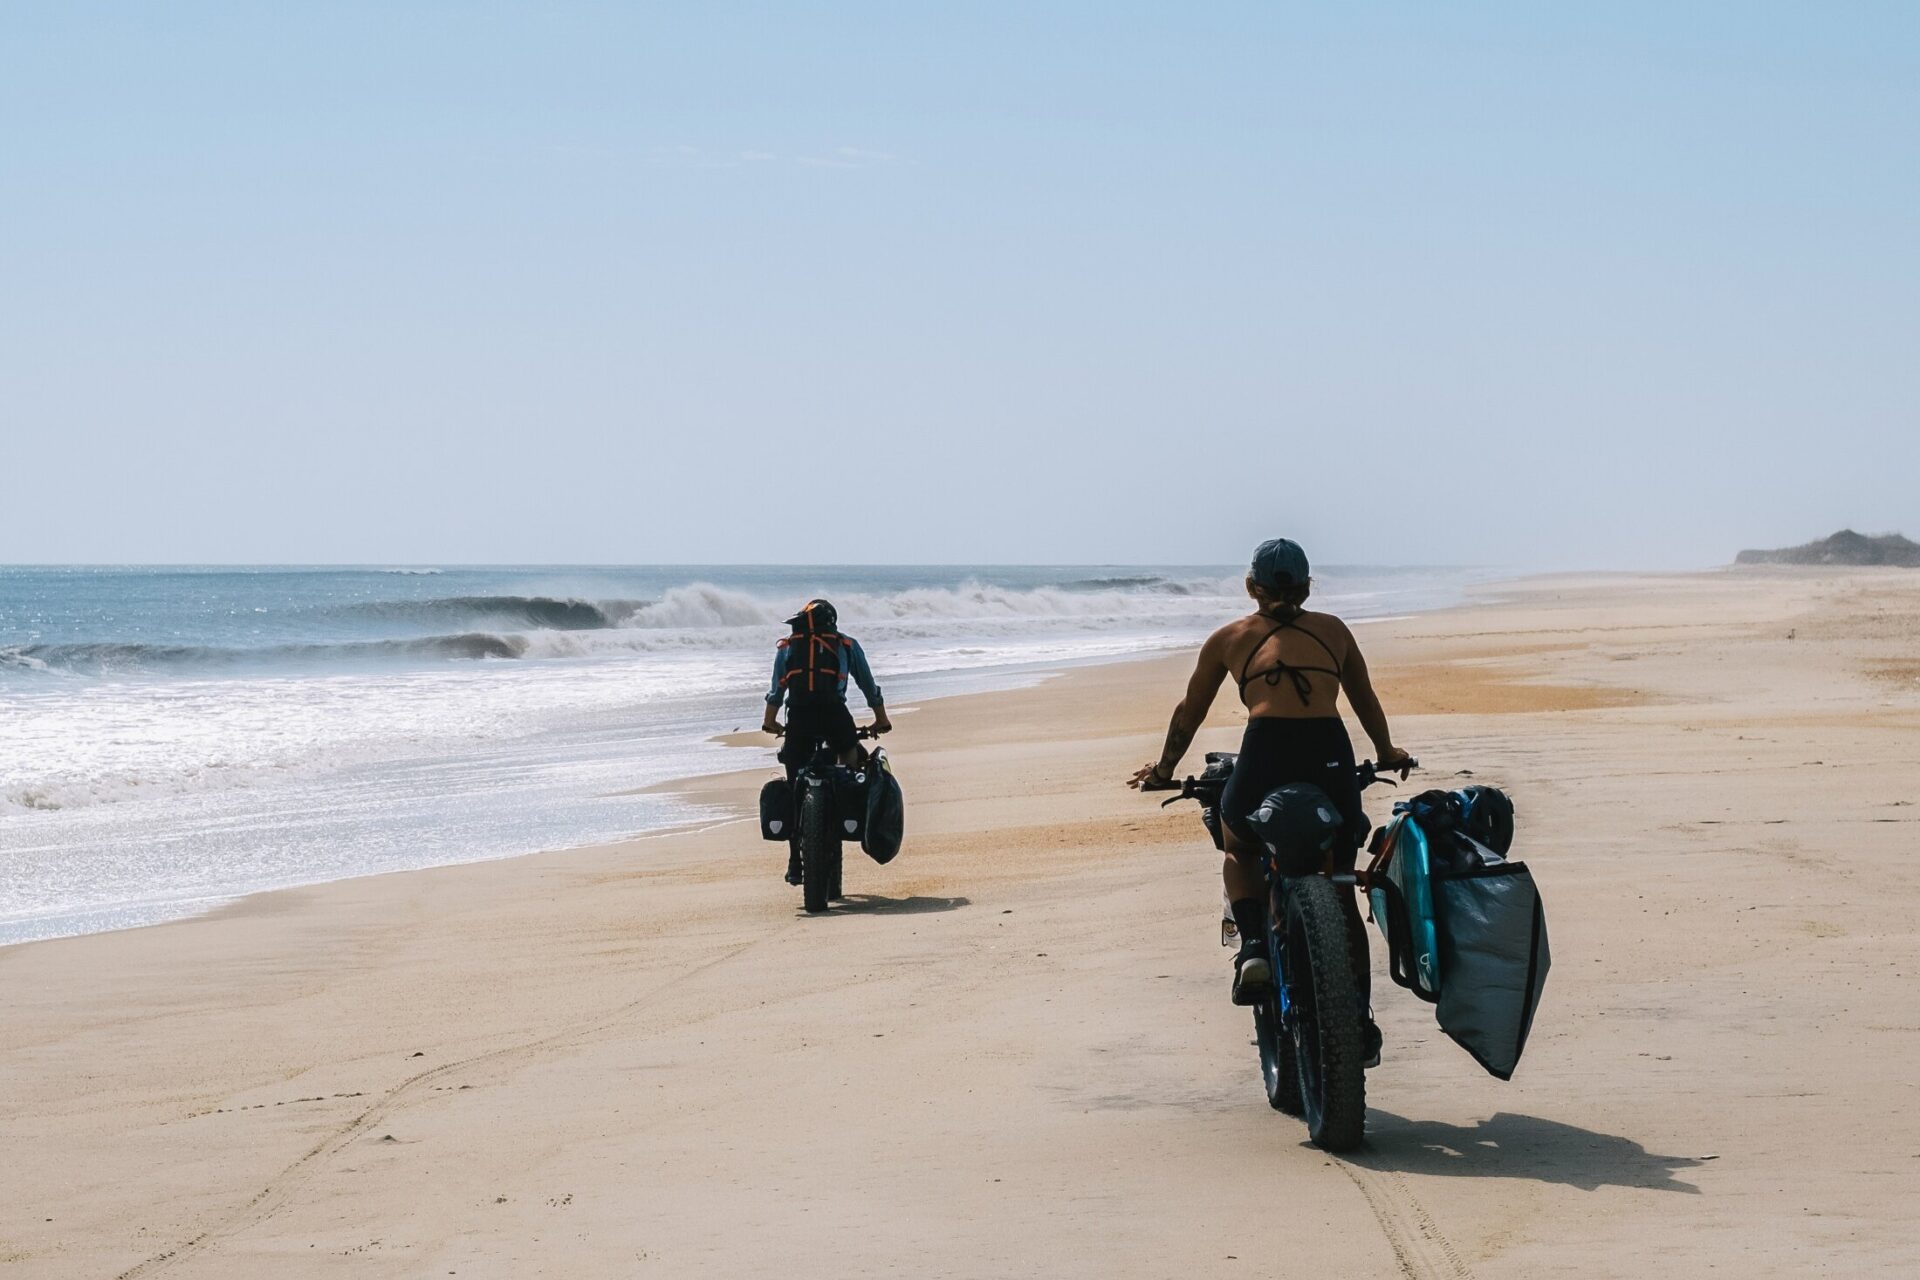 Somewhere north of Rodanthe, we rode past hundreds of perfect breaks on a hunch to reach a bank that would provide bigger and better waves. It did.